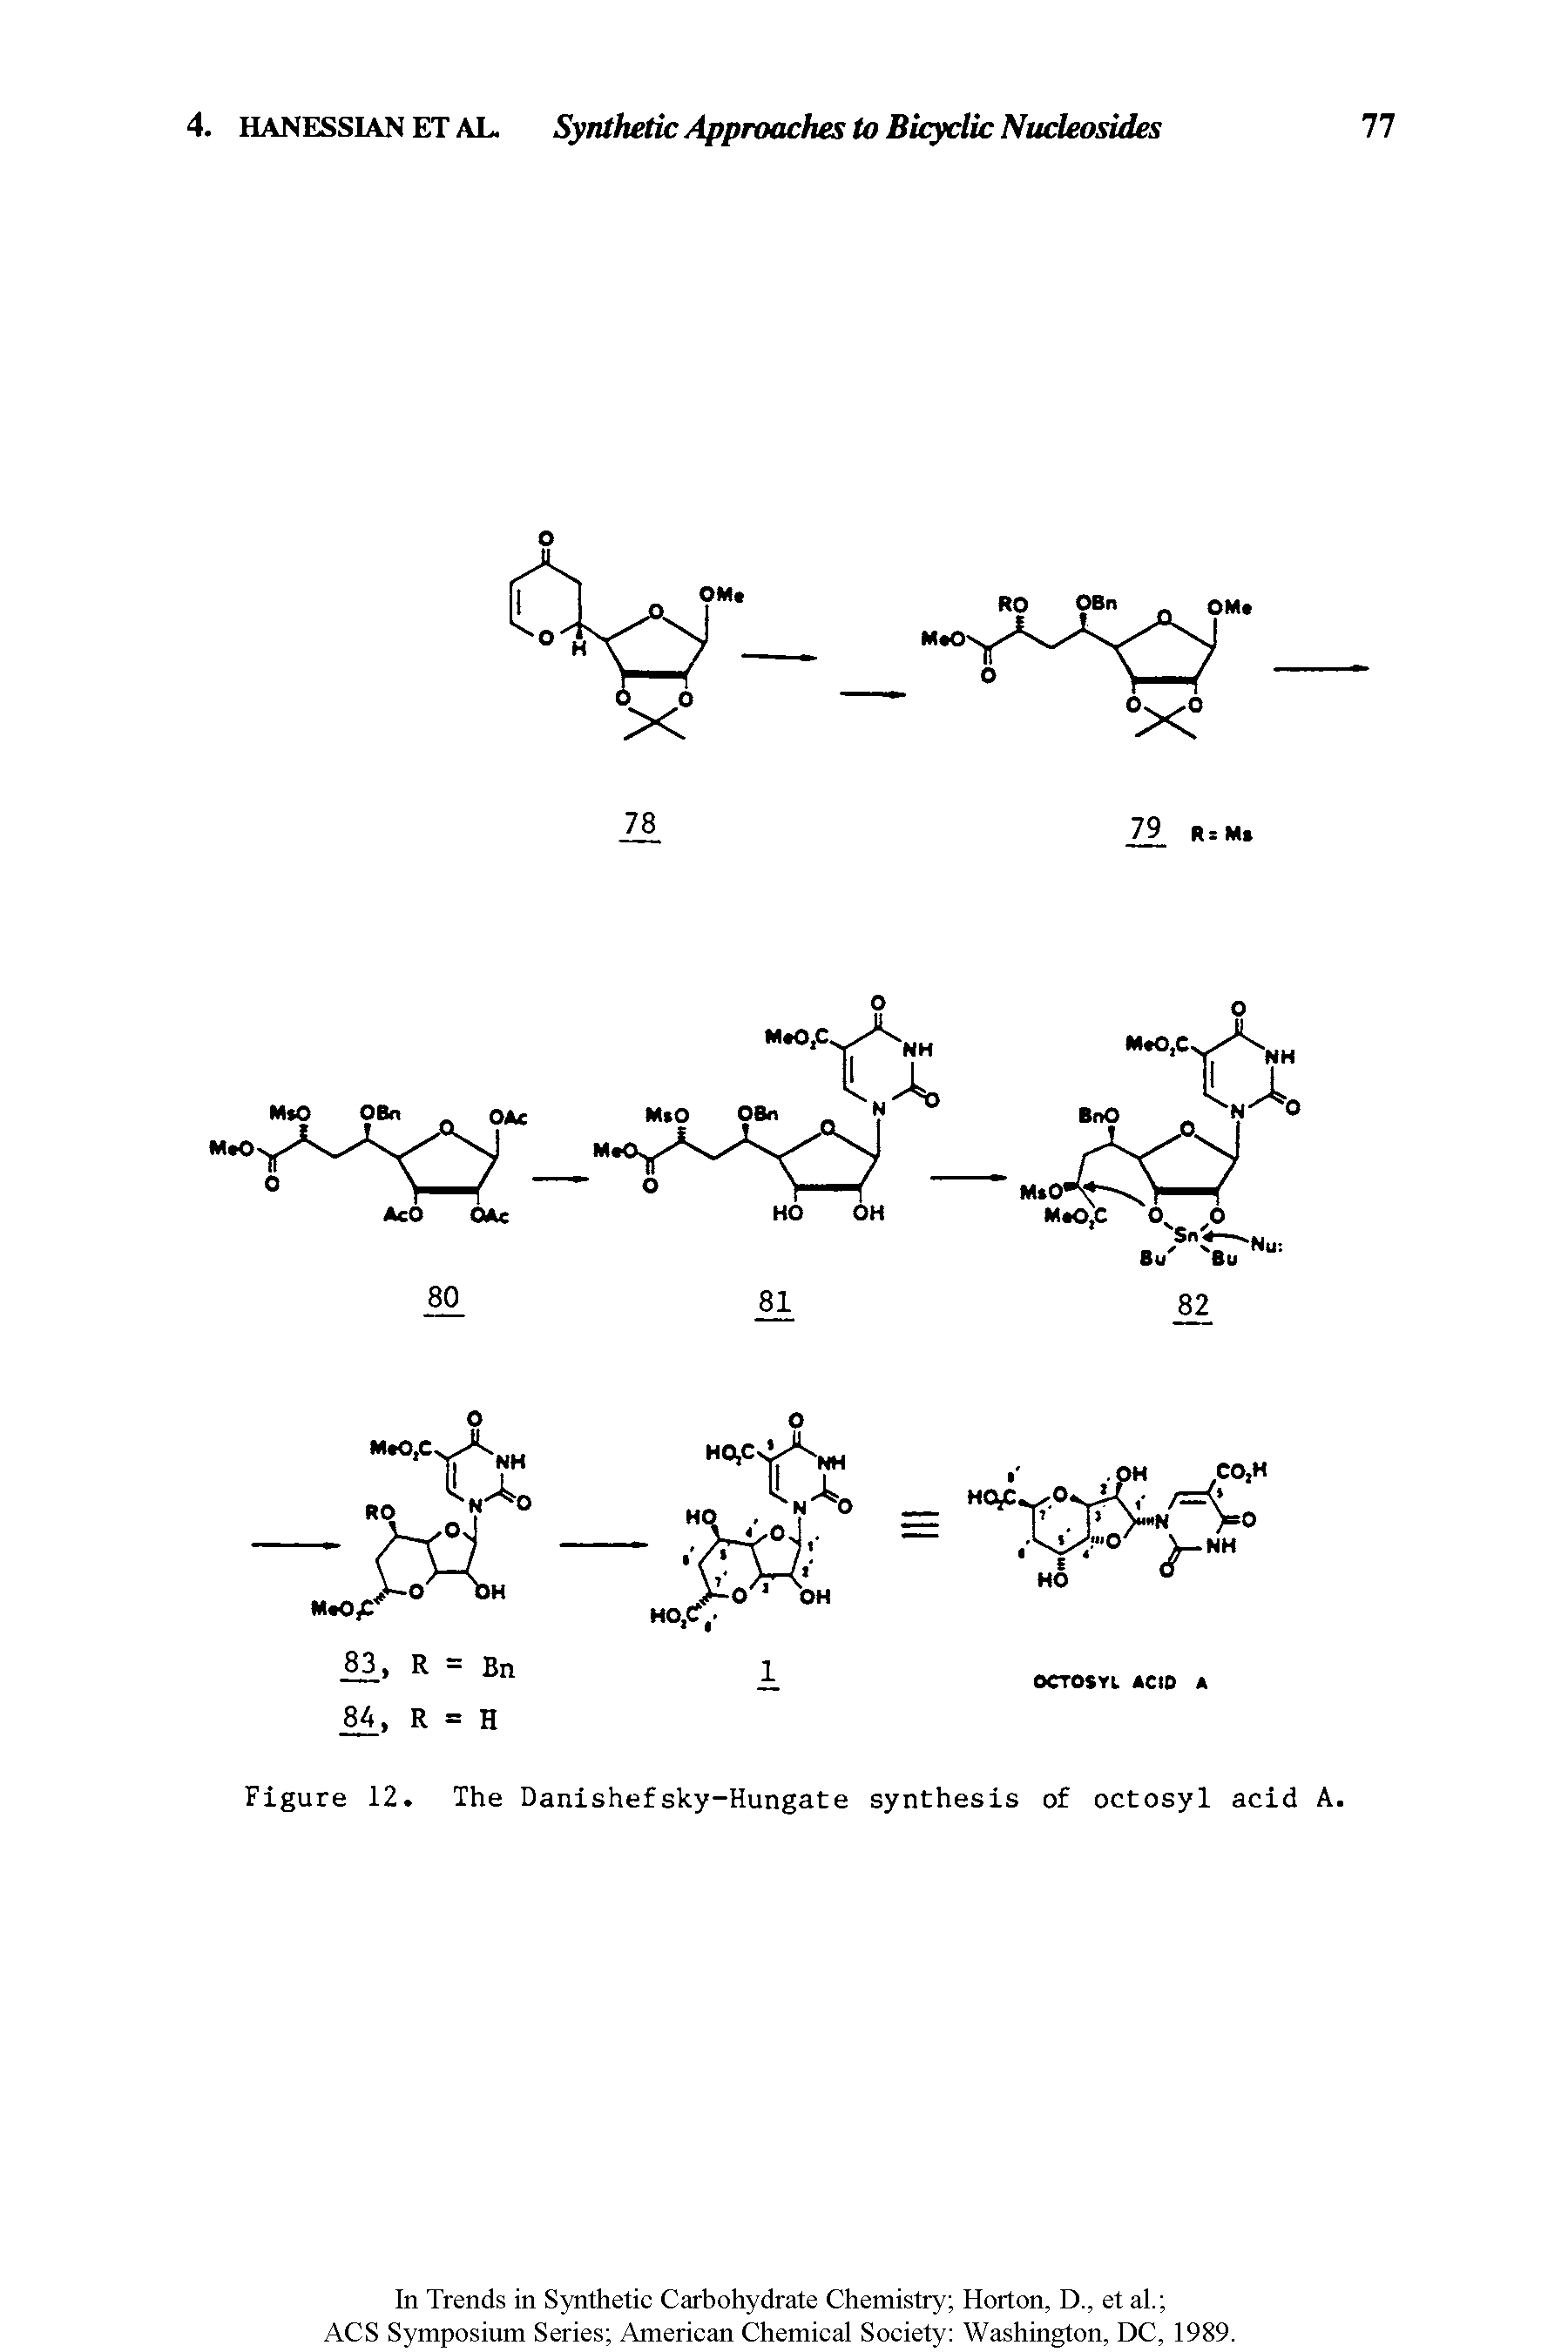 Figure 12. The Danishefsky-Hungate synthesis of octosyl acid A.